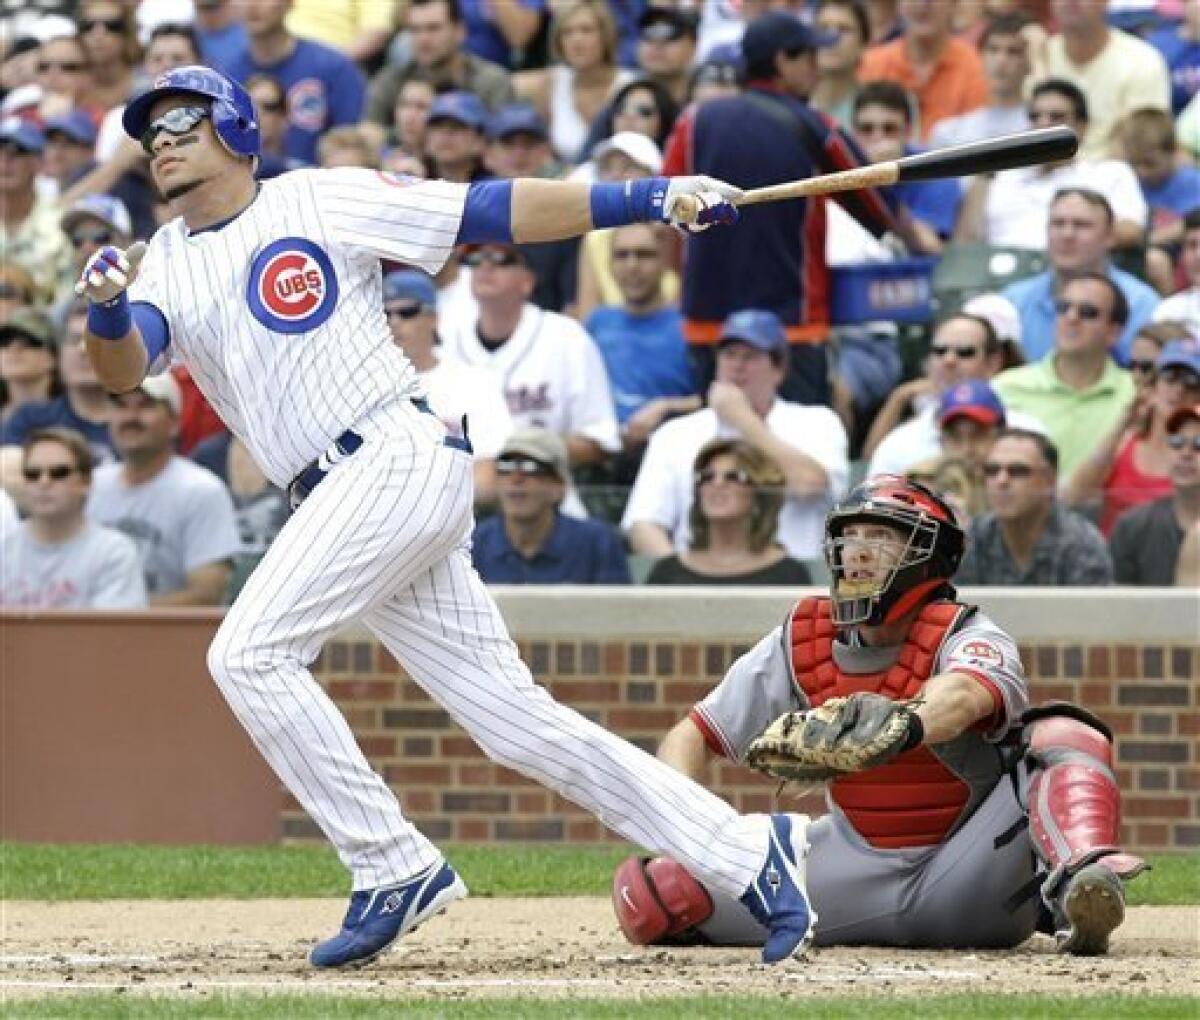 Cubs: Why Aramis Ramirez didn't get stronger Hall of Fame consideration